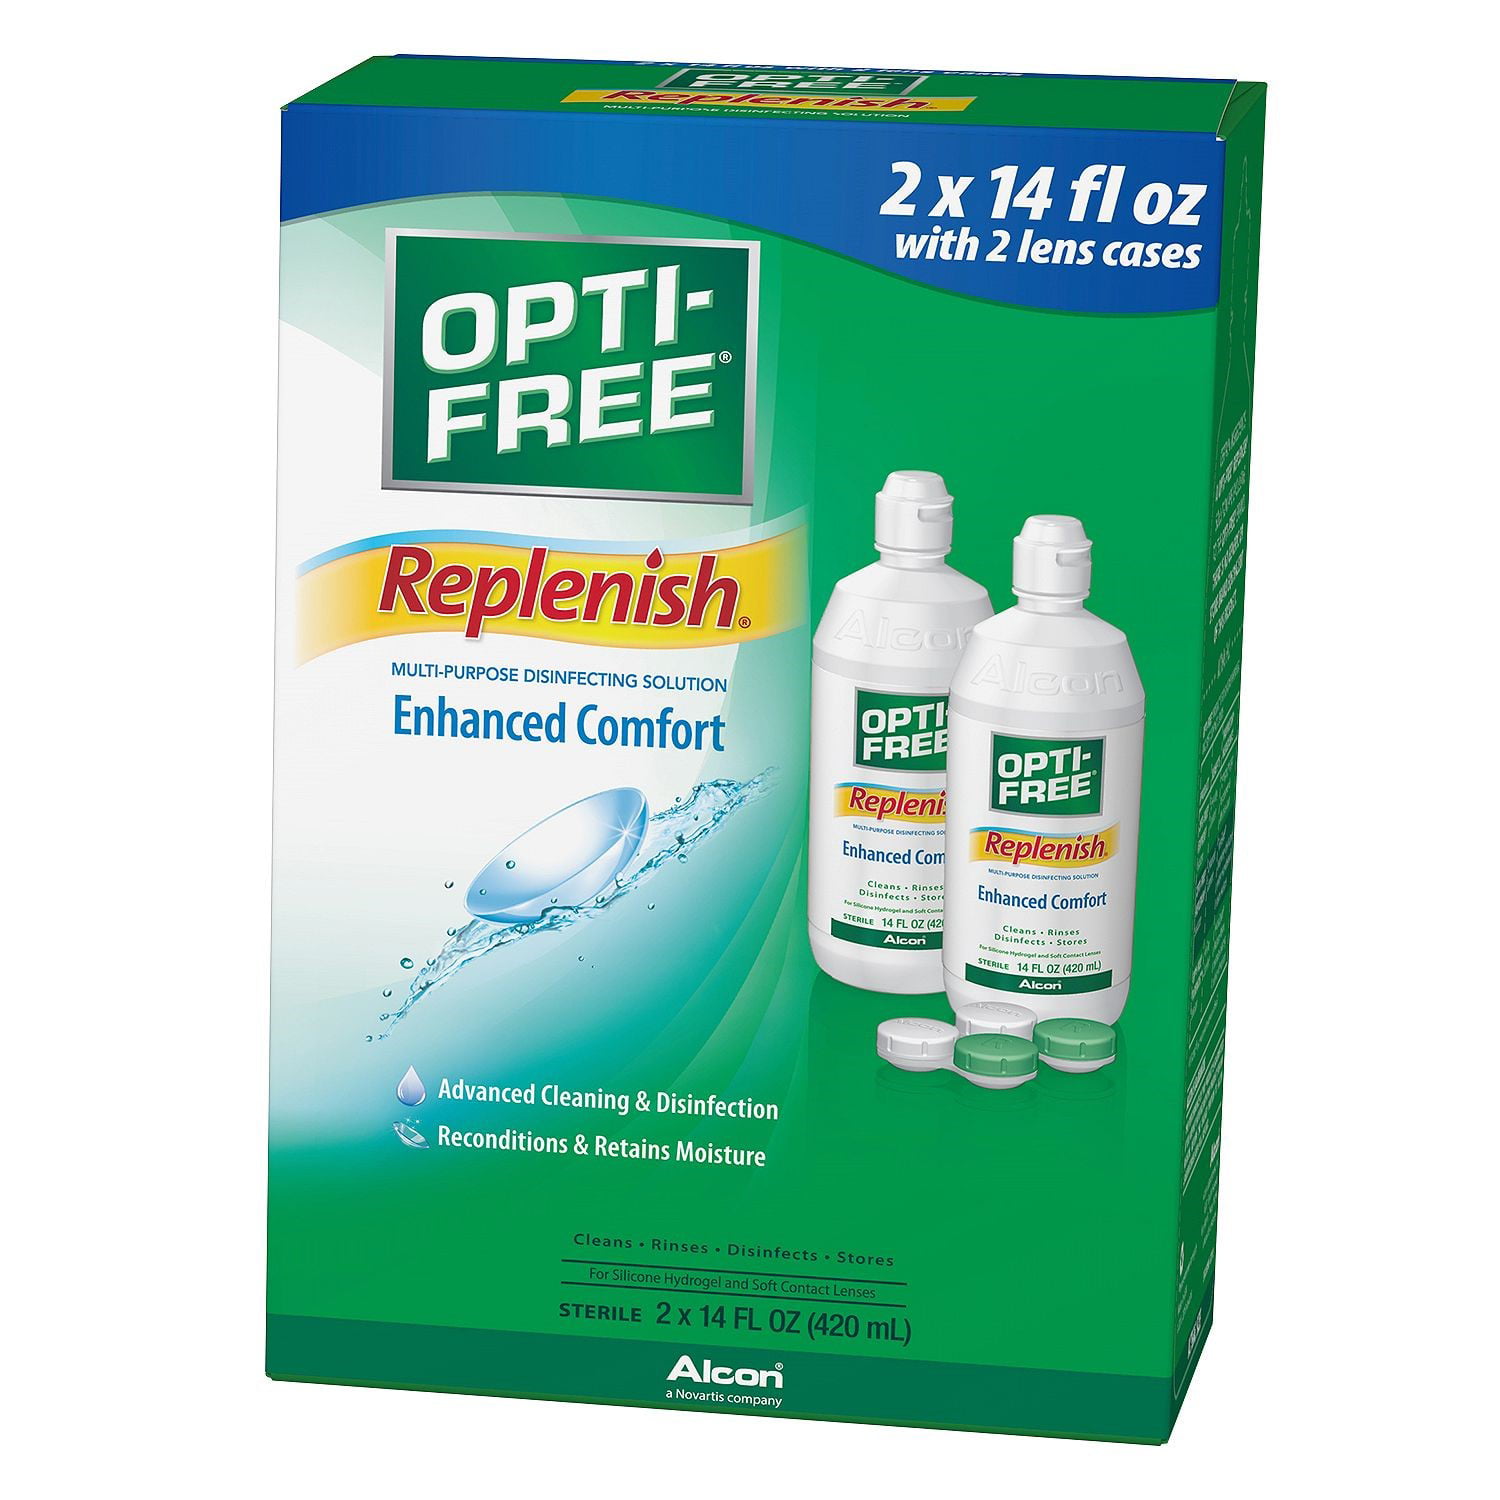 Optiphen Plus 8oz for only 2800